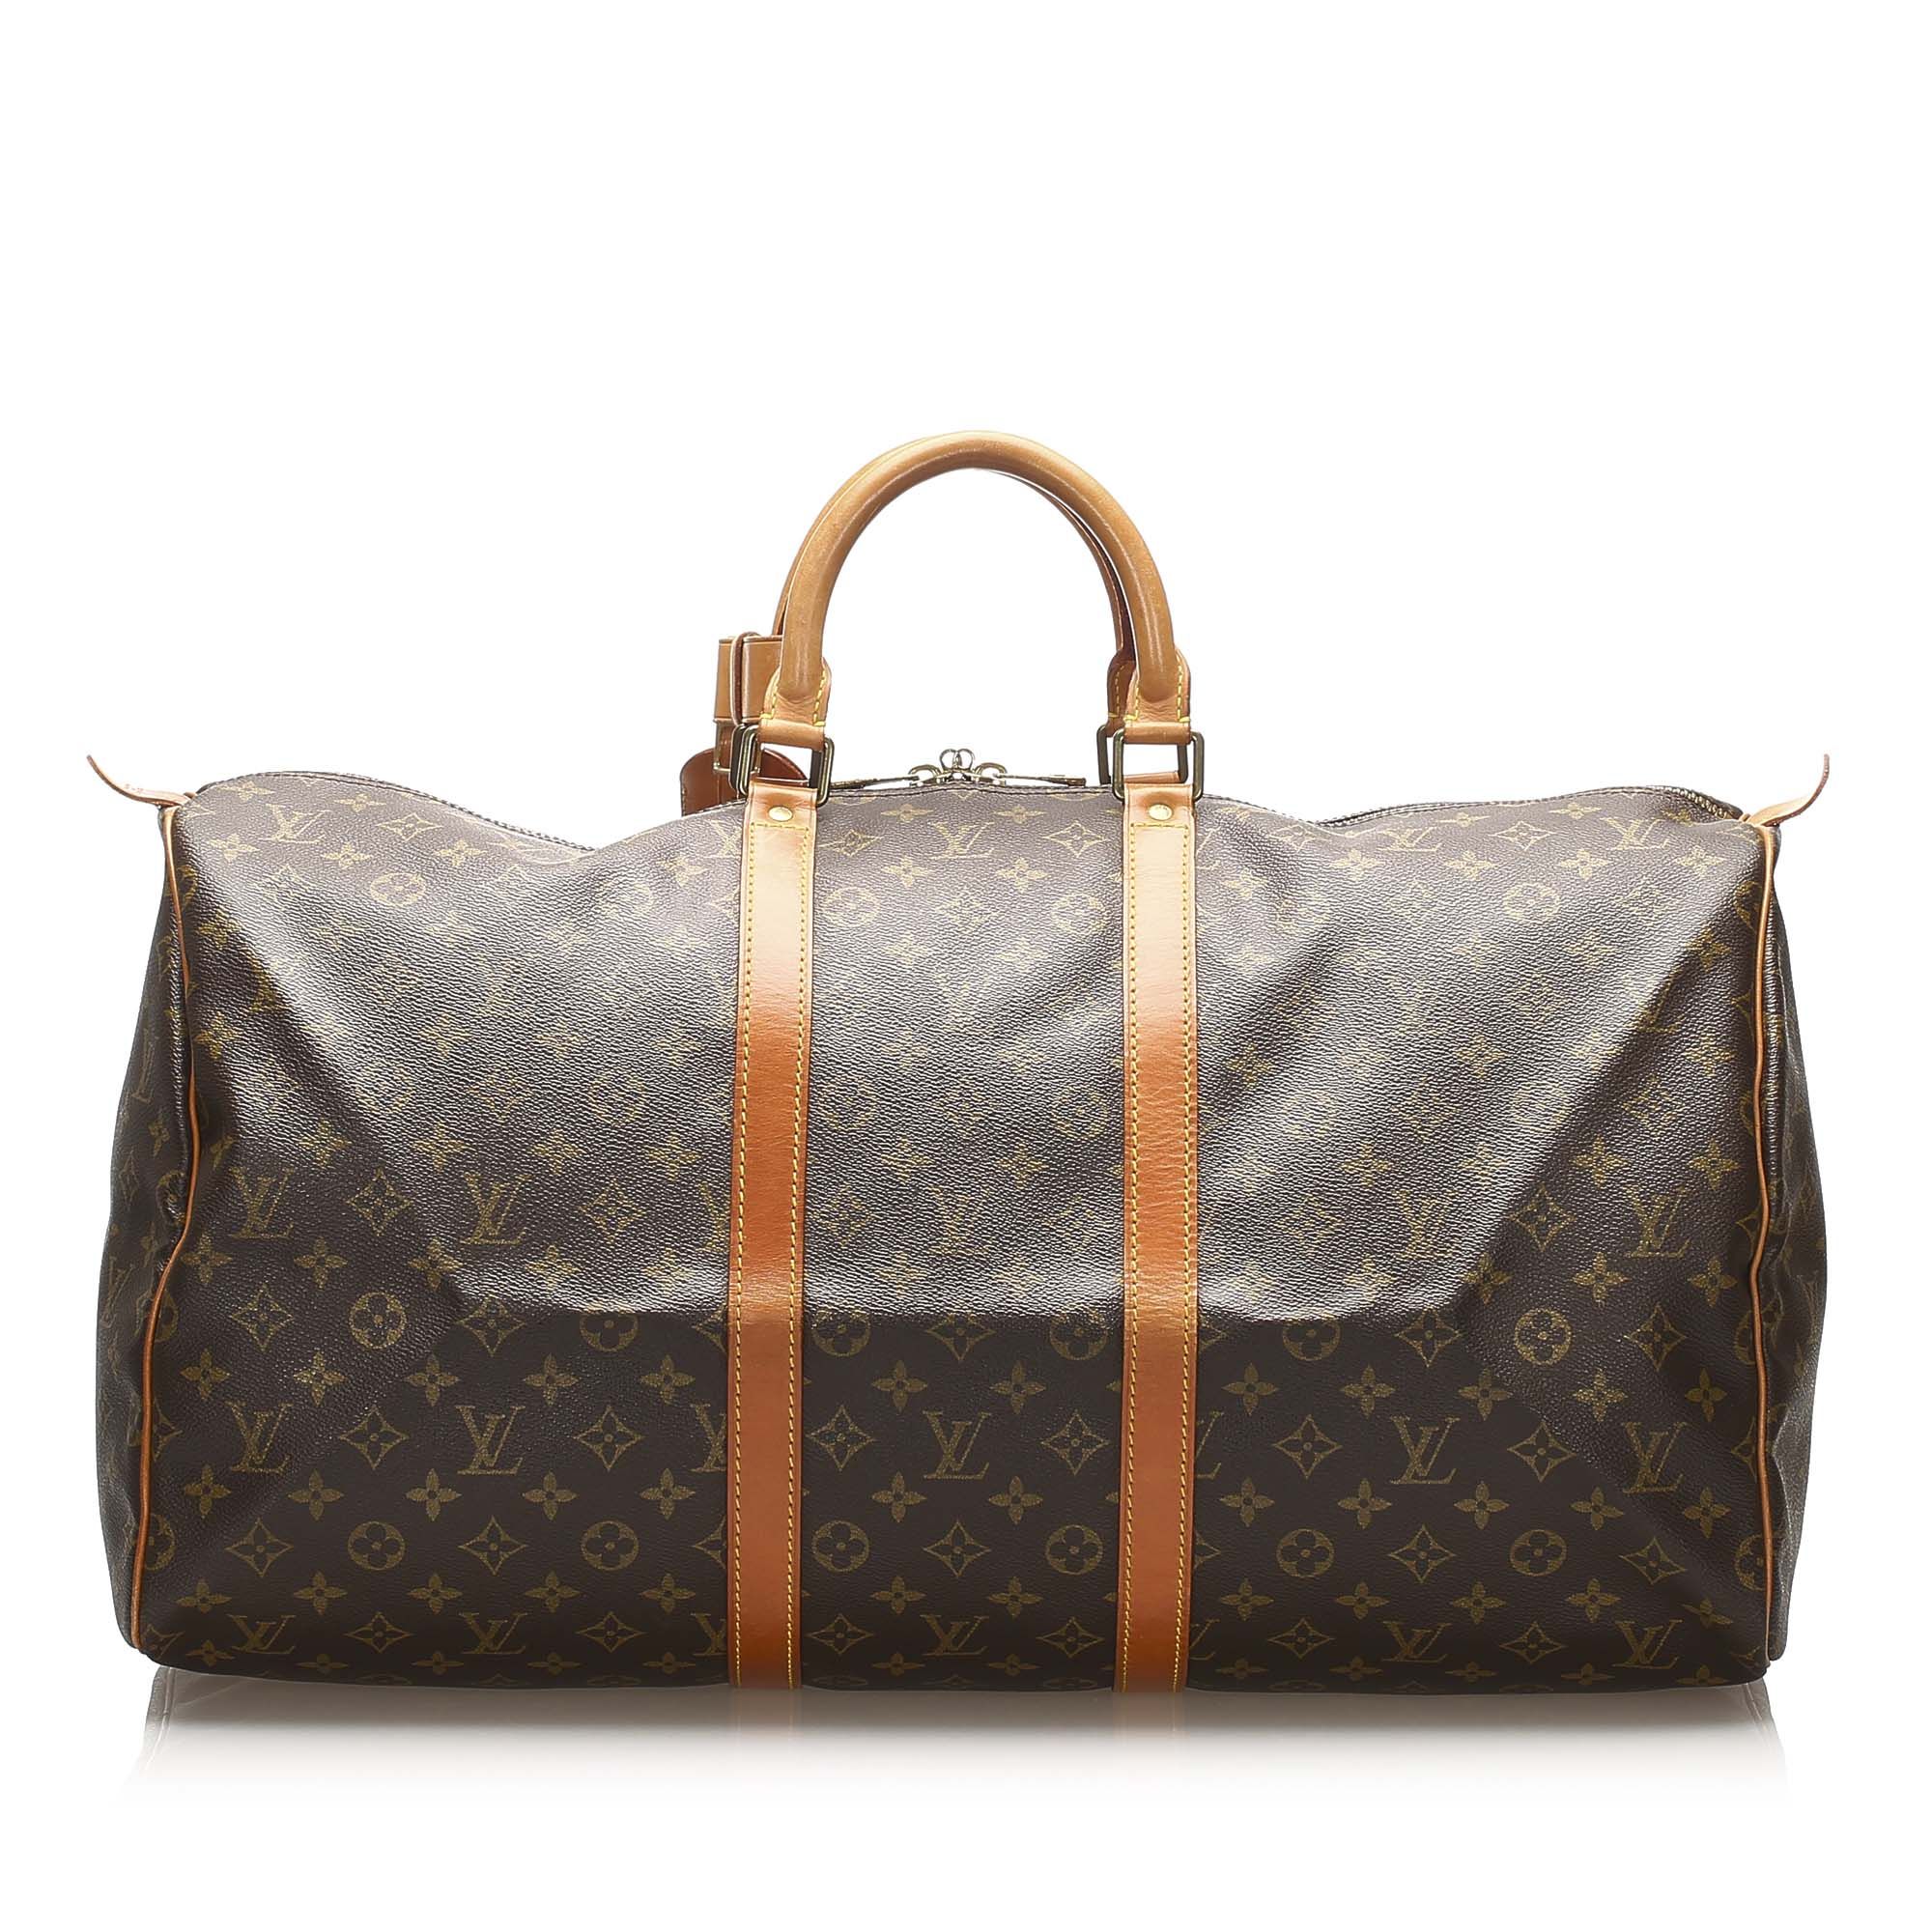 VINTAGE. RRP AS NEW. The Keepall 55 features a monogram canvas body with leather trim, a rolled leather handles, and a top zip closure.Exterior back is discolored. Exterior bottom is discolored. Exterior corners is discolored and scratched. Exterior front is discolored. Exterior handle is discolored. Exterior side is discolored. Buckle is scratched and tarnished. Zipper is scratched and tarnished.

Dimensions:
Length 28cm
Width 55cm
Depth 25cm
Hand Drop 33cm
Shoulder Drop 33cm

Original Accessories: This item has no other original accessories.

Serial Number: VI871
Color: Brown
Material: Canvas x Monogram Canvas x Leather x Vachetta Leather
Country of Origin: France
Boutique Reference: SSU91512K1342


Product Rating: GoodCondition